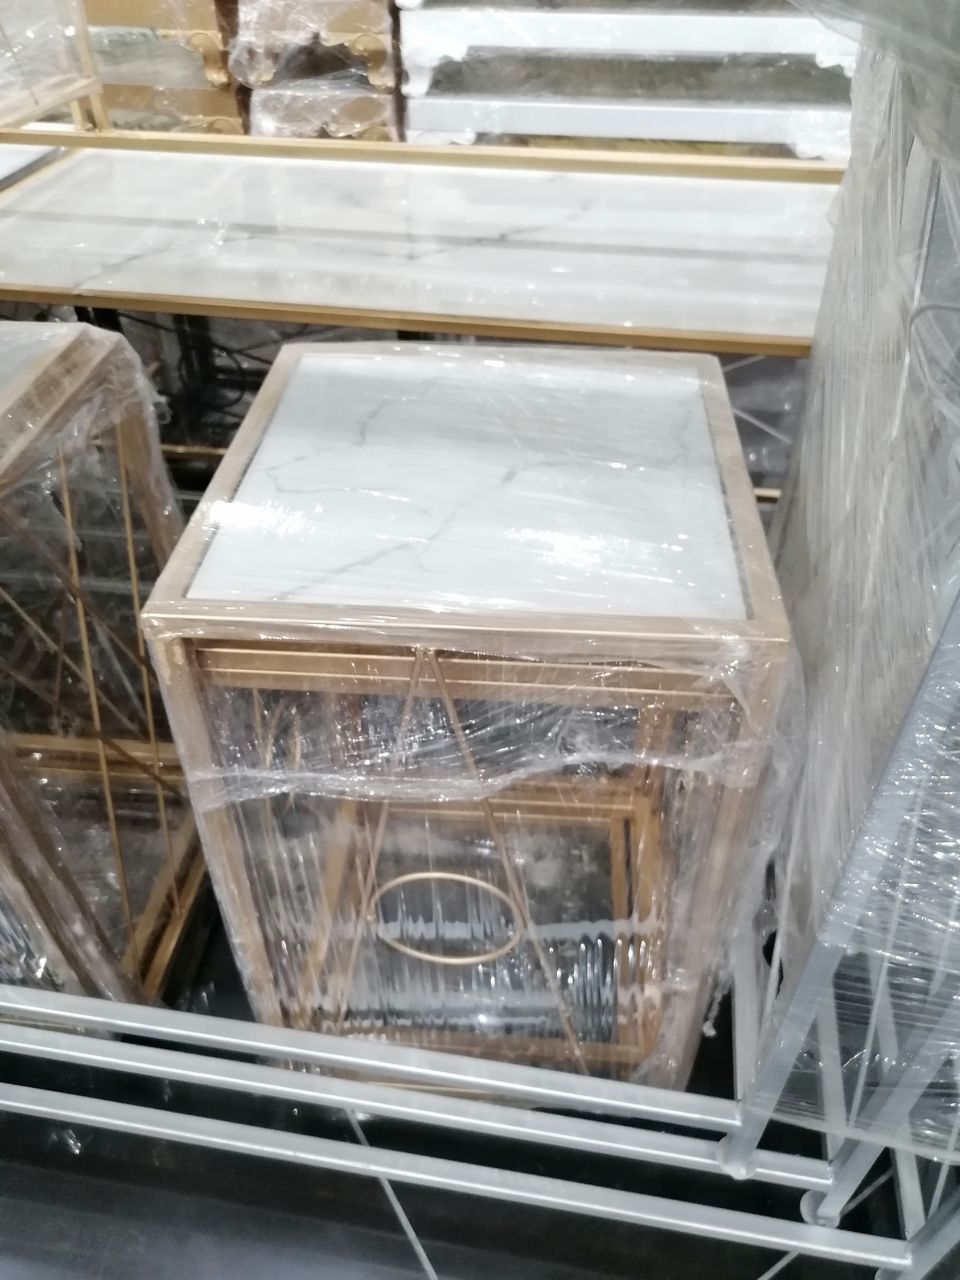 HIGH ANGLE VIEW OF GLASS CONTAINER ON STORE